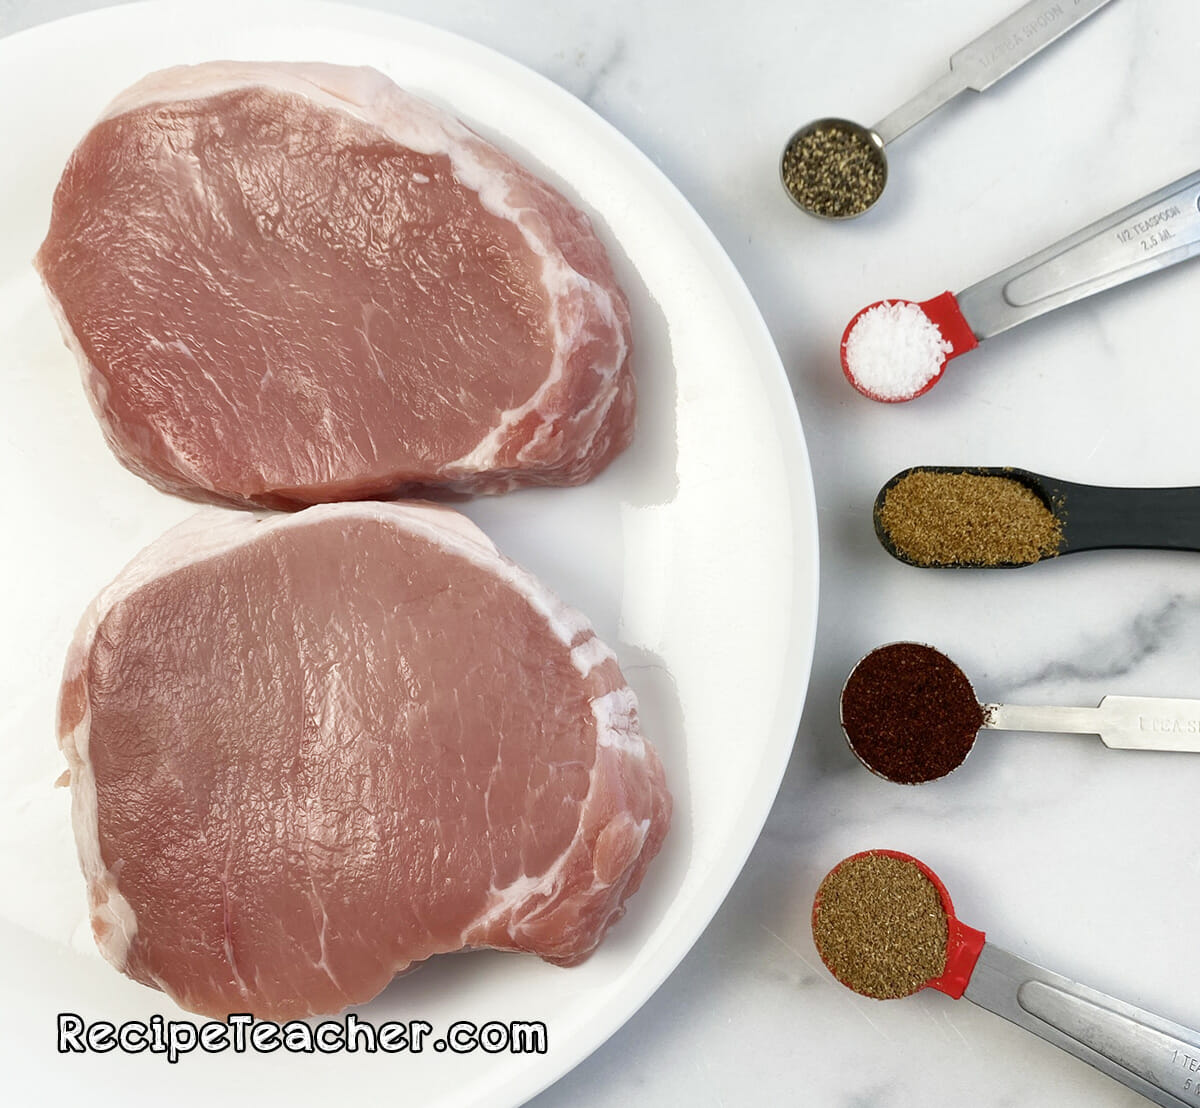 Recipe and ingredients for air fryer coriander crusted pork chops